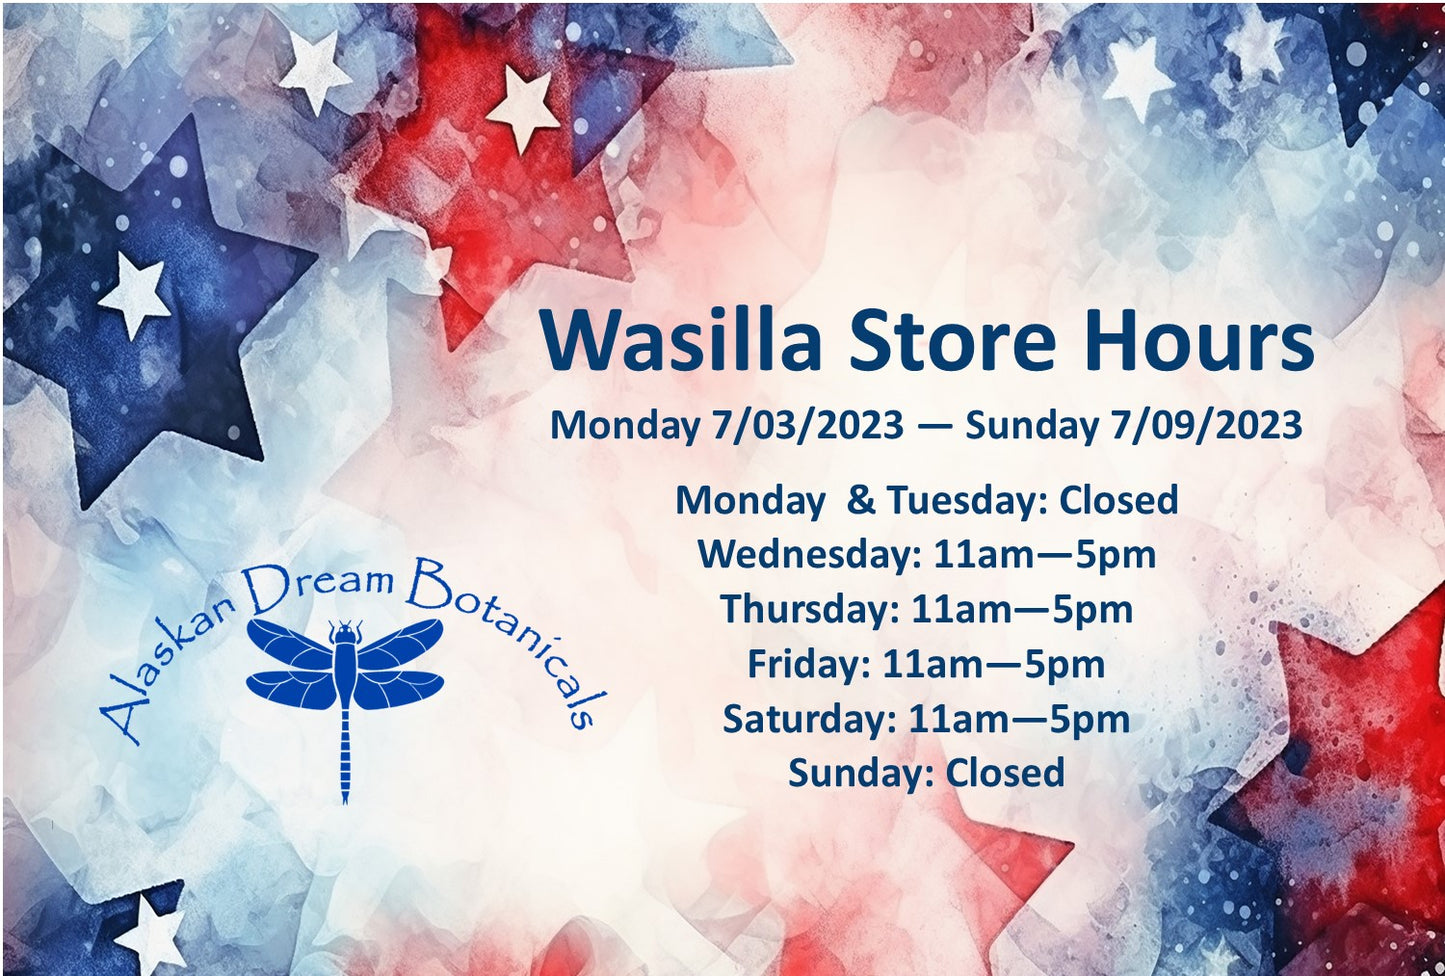 Wasilla Store Hours for week of 7/03/23 - 07/09/2023